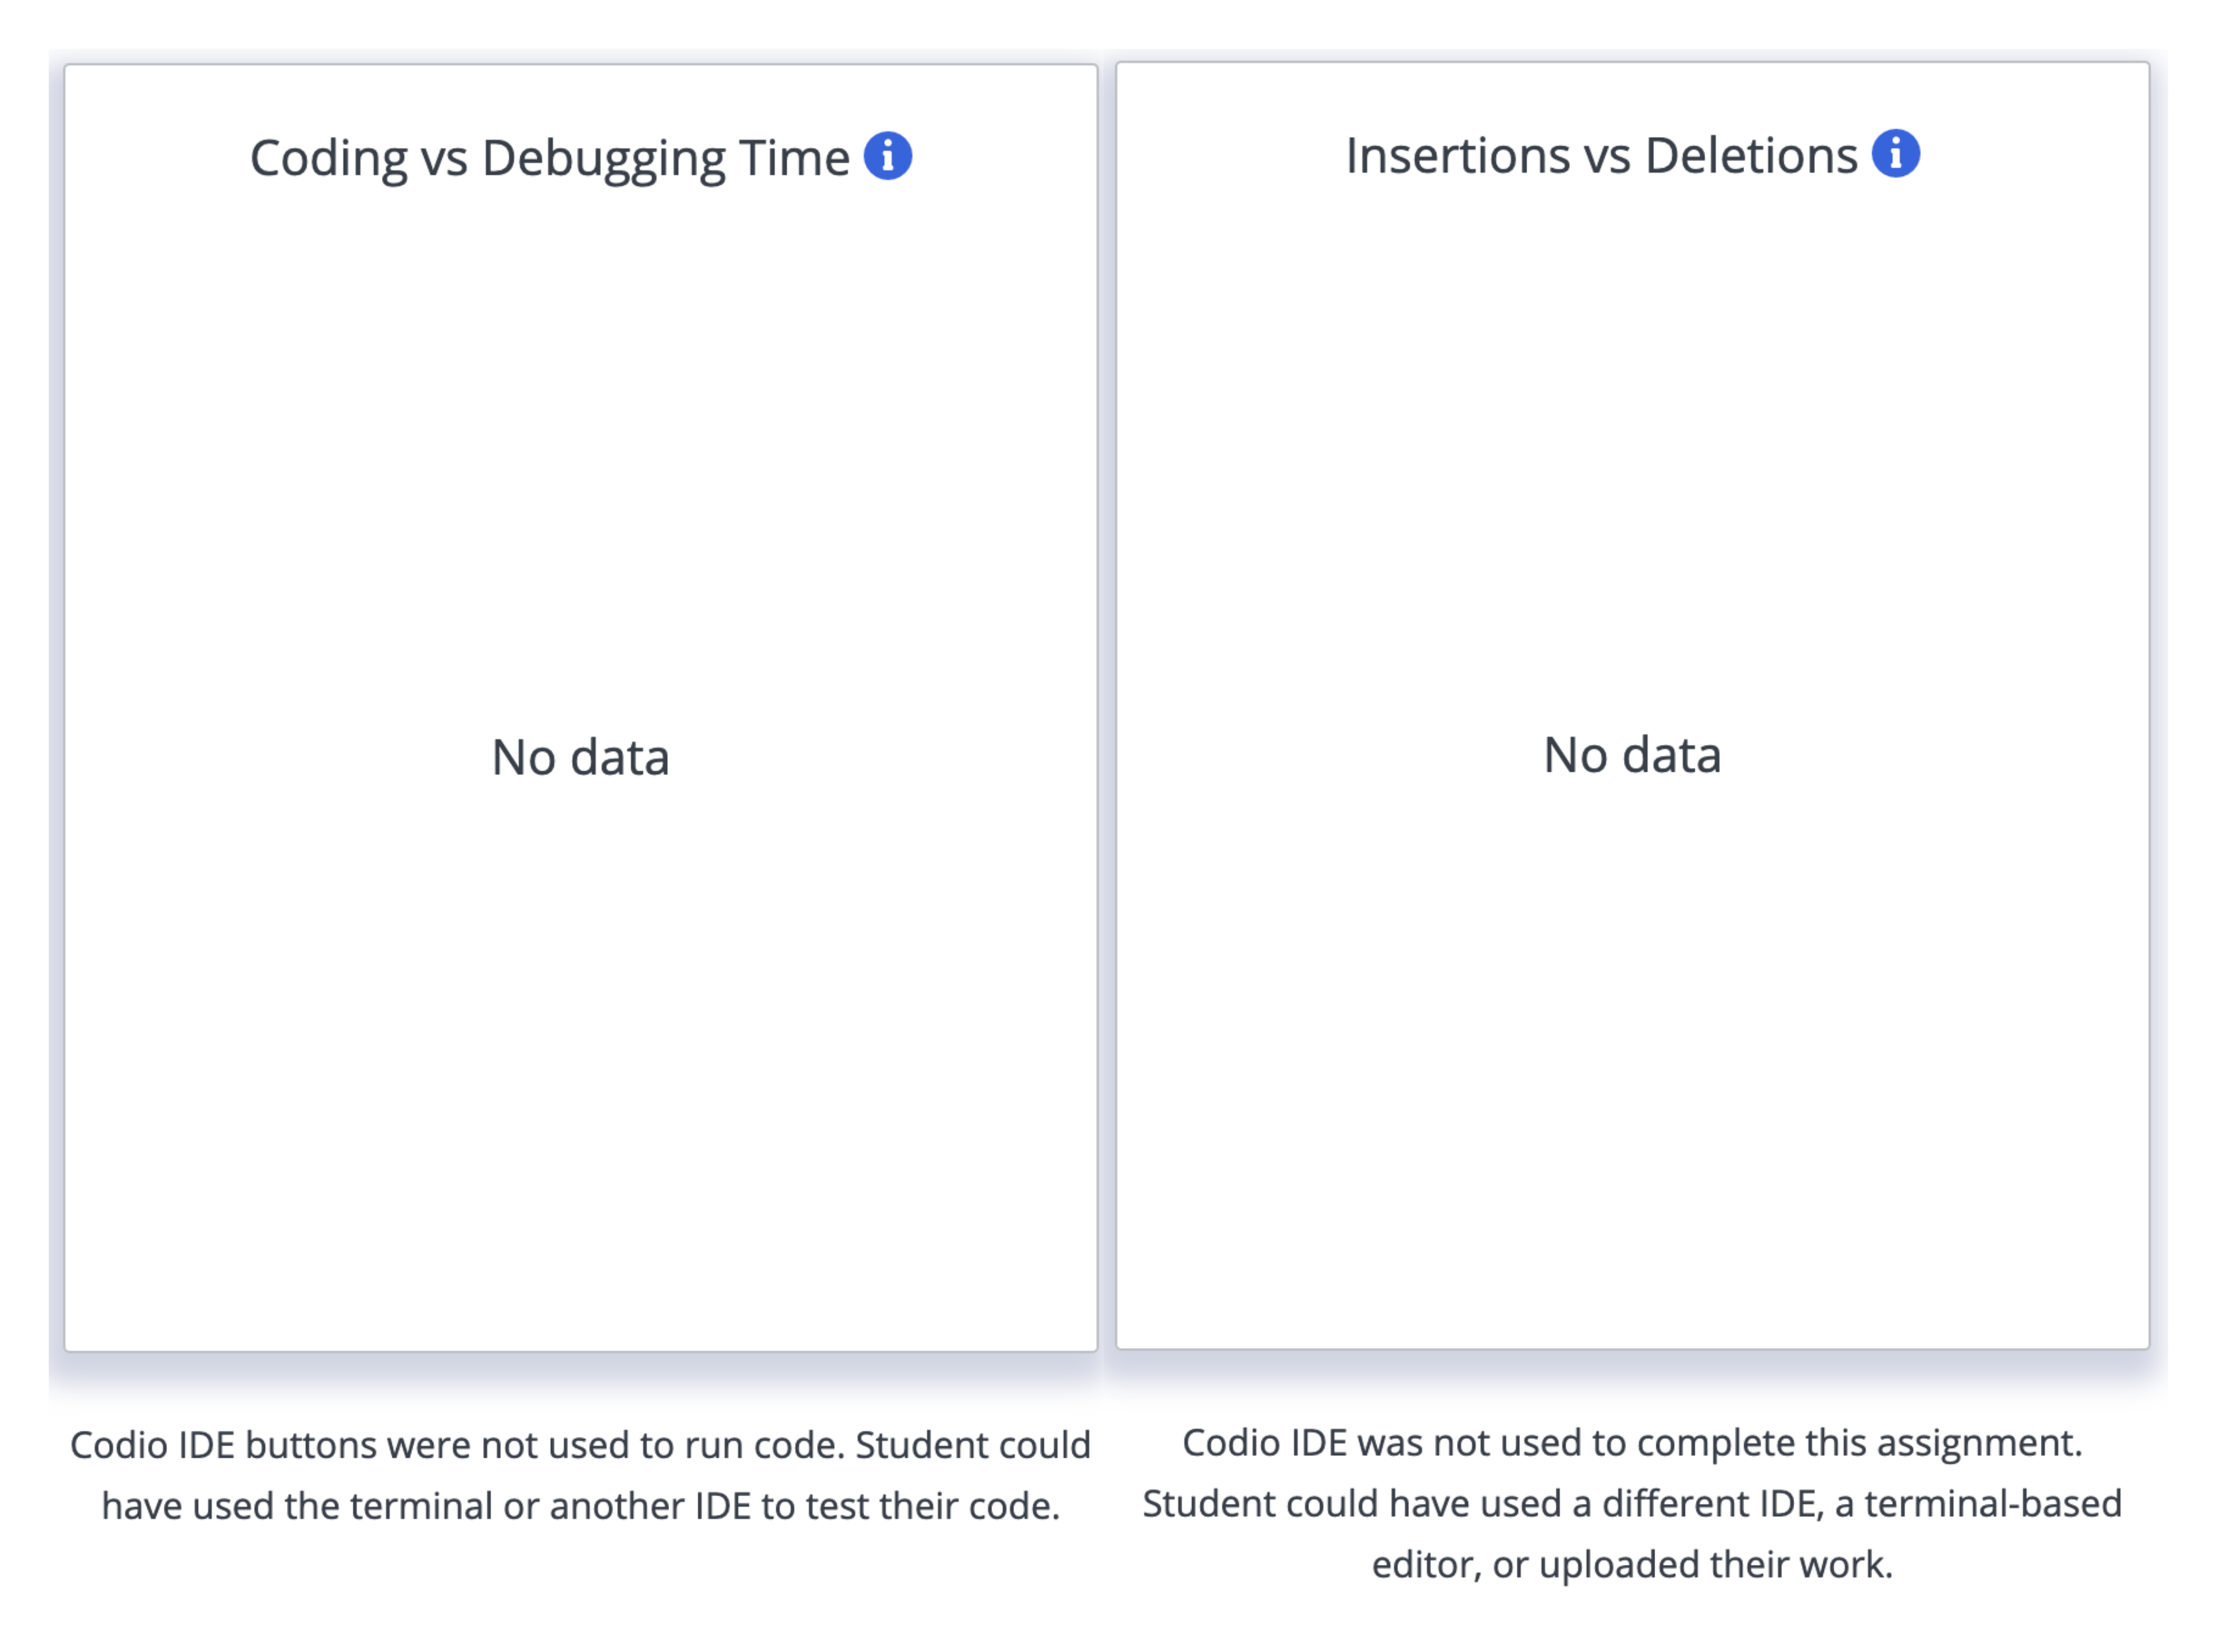 No data displayed on Coding vs Debugging and Insertions vs Deletions tiles